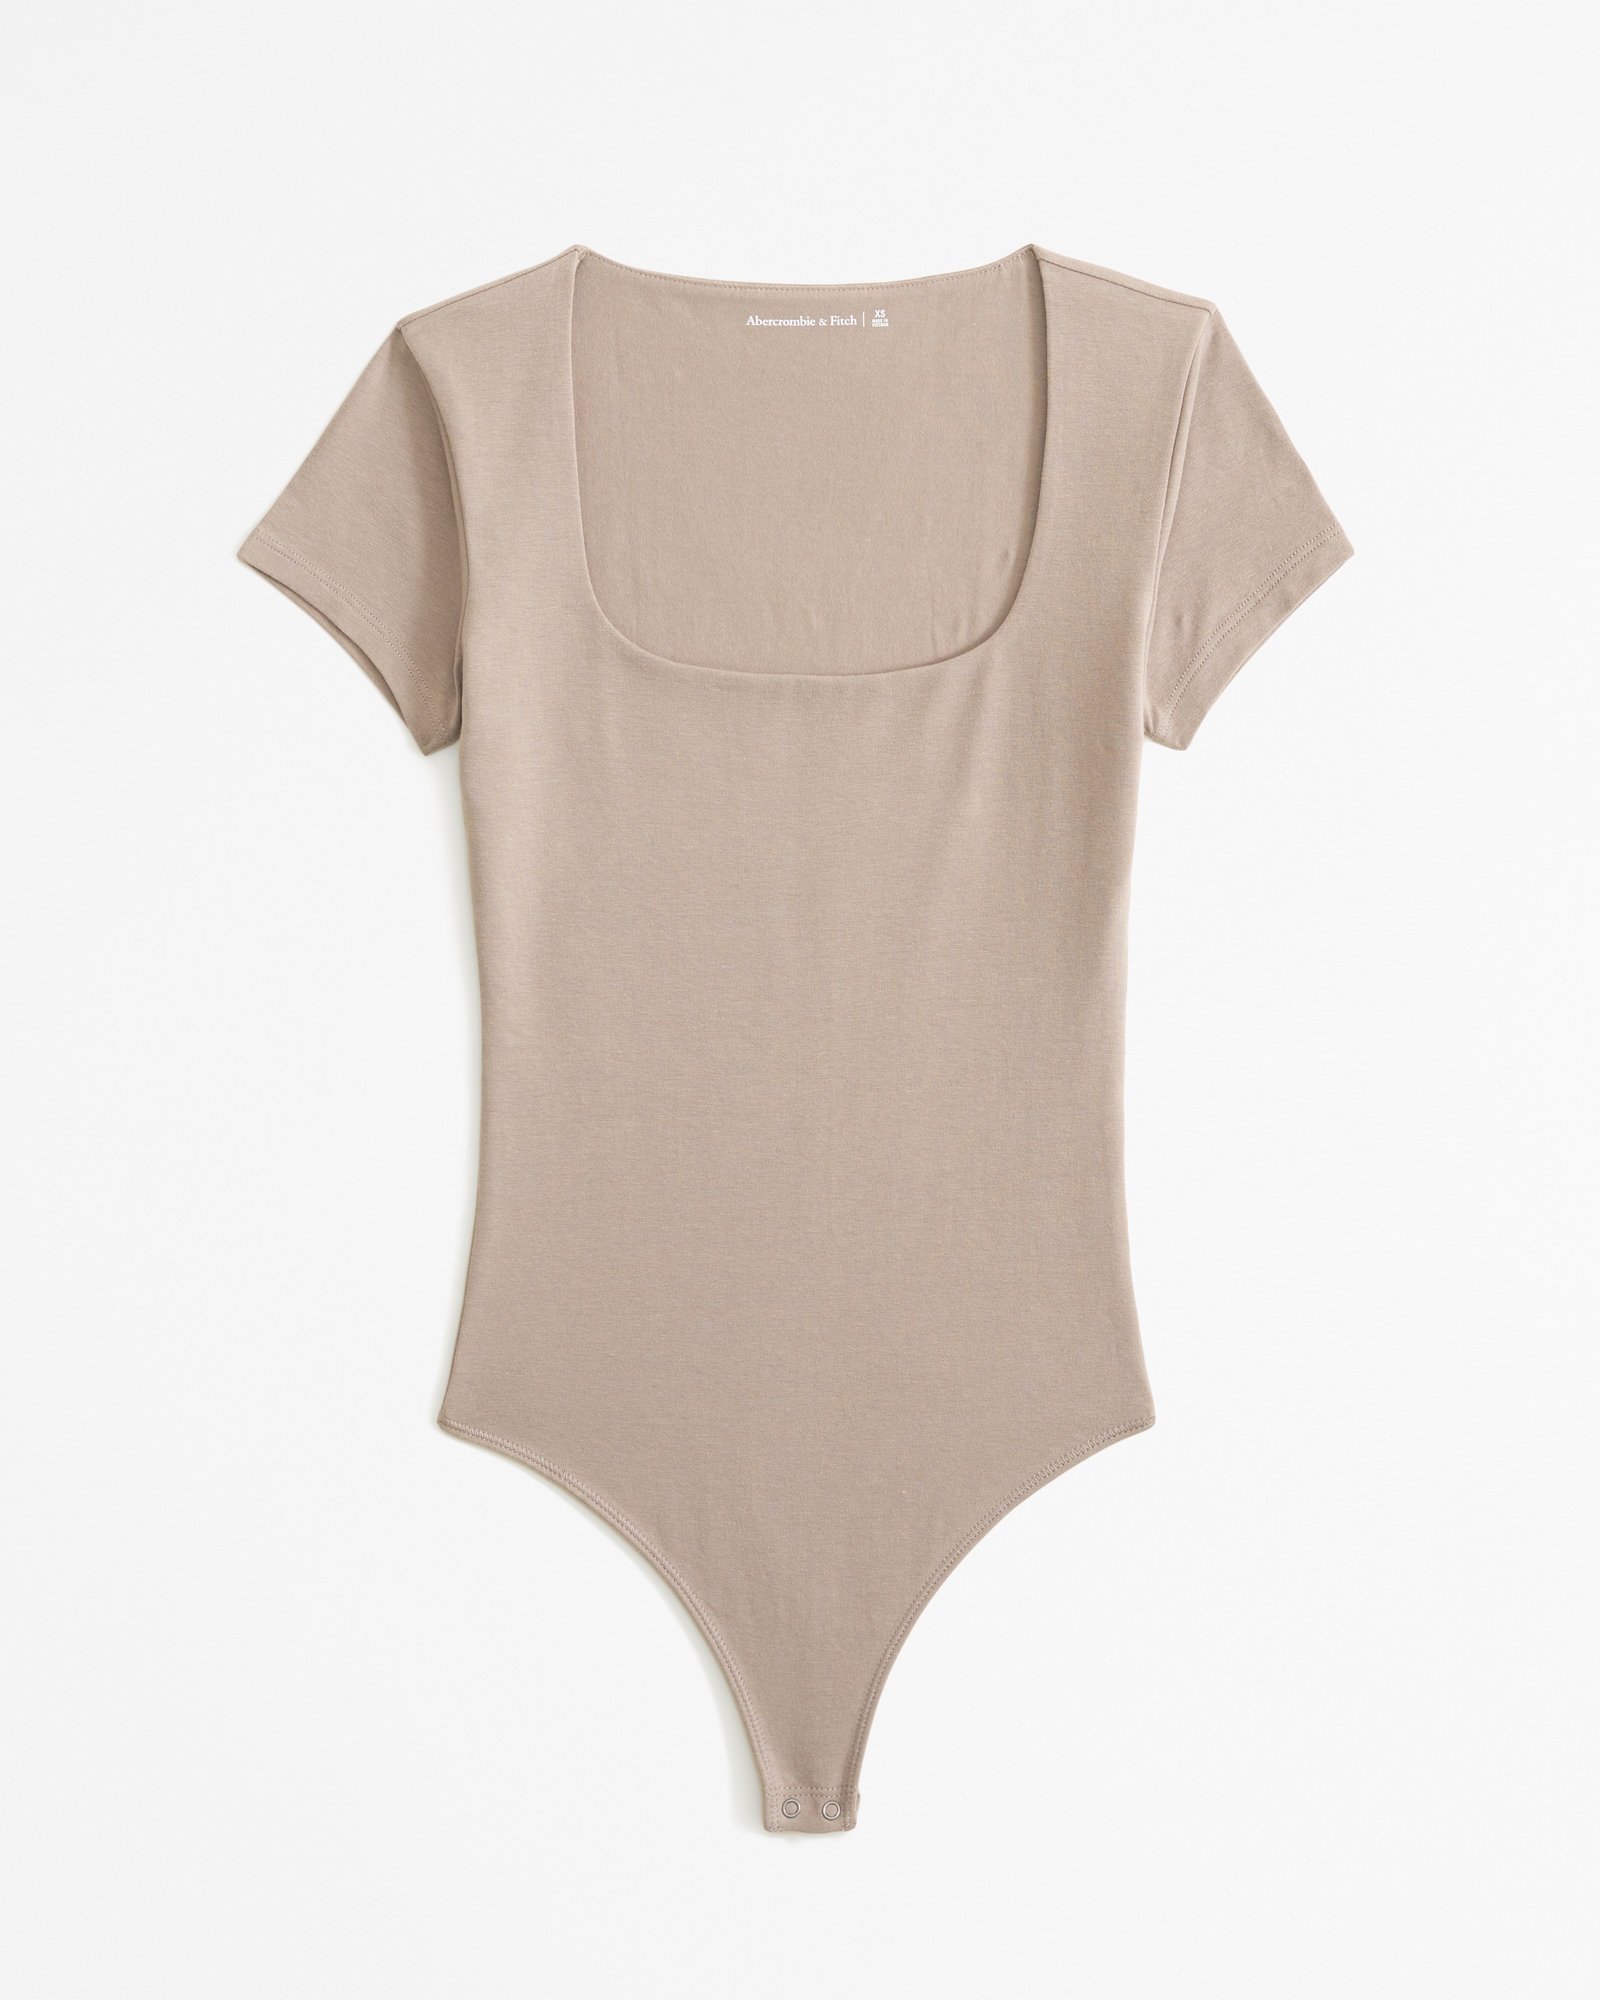 Abercrombie & Fitch Soft A&F Double-Layered Squareneck Bodysuit